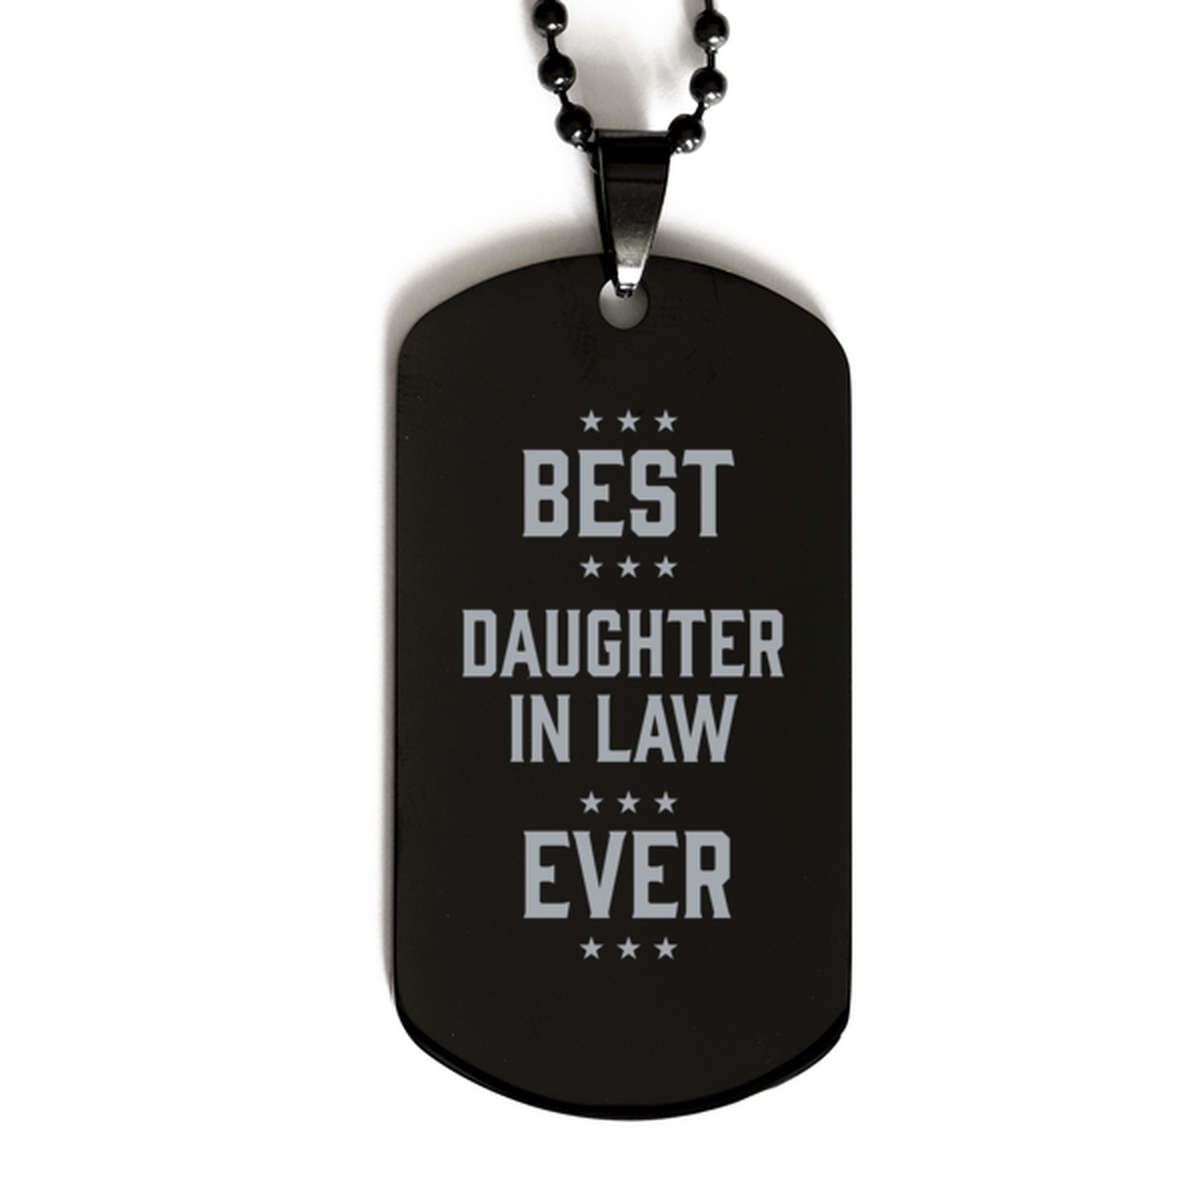 Best Daughter in law Ever Daughter in law Gifts, Funny Black Dog Tag For Daughter in law, Birthday Family Presents Engraved Necklace For Women